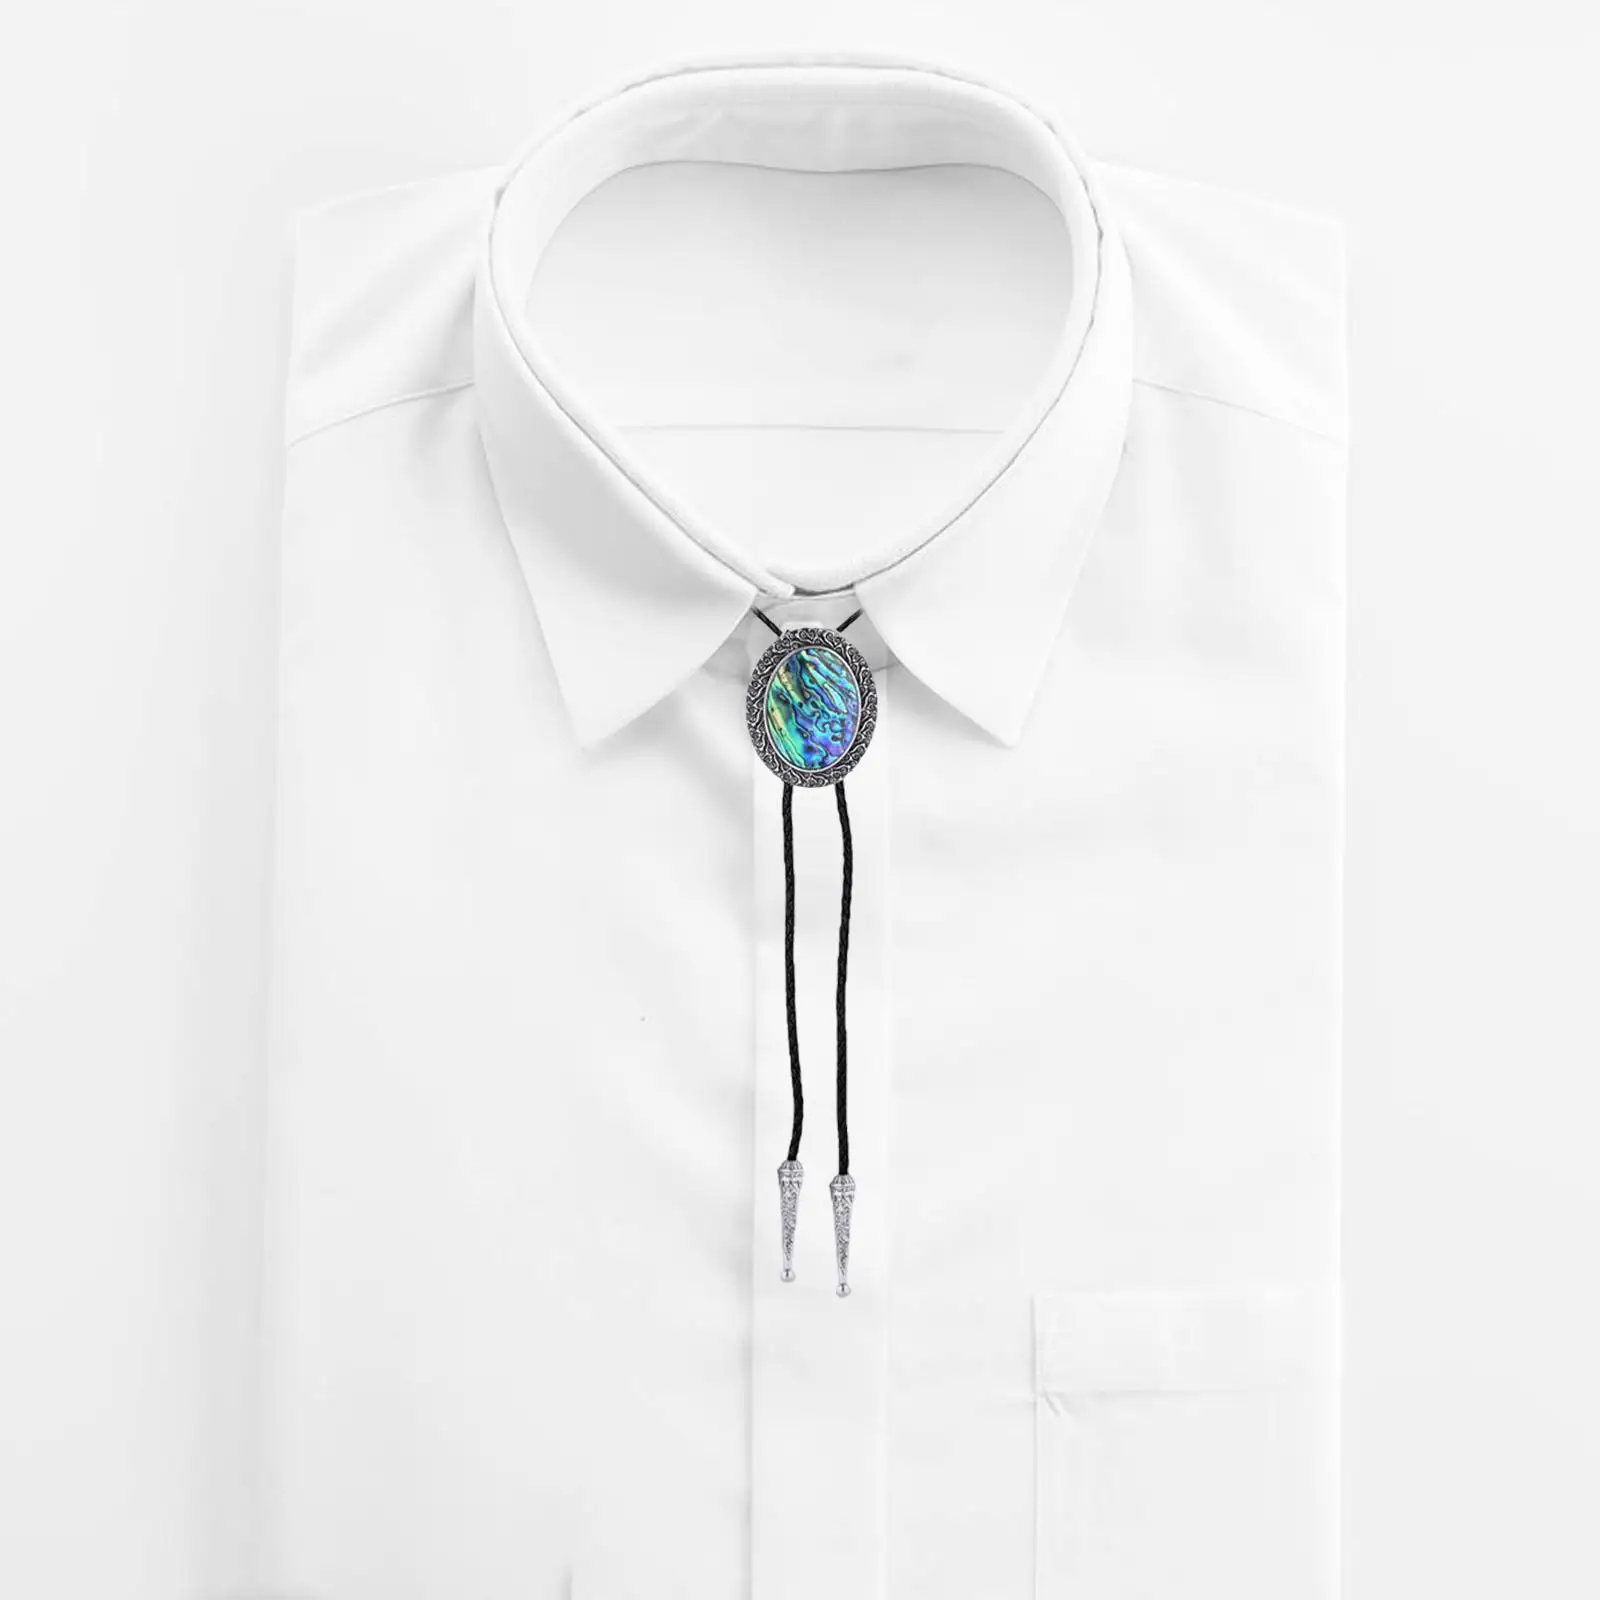 Stylish Vintage Style Bolo Tie Cowboy Necktie Costume Accessory Western Necklace Tie with Pendant for Teens Women Birthday Gift